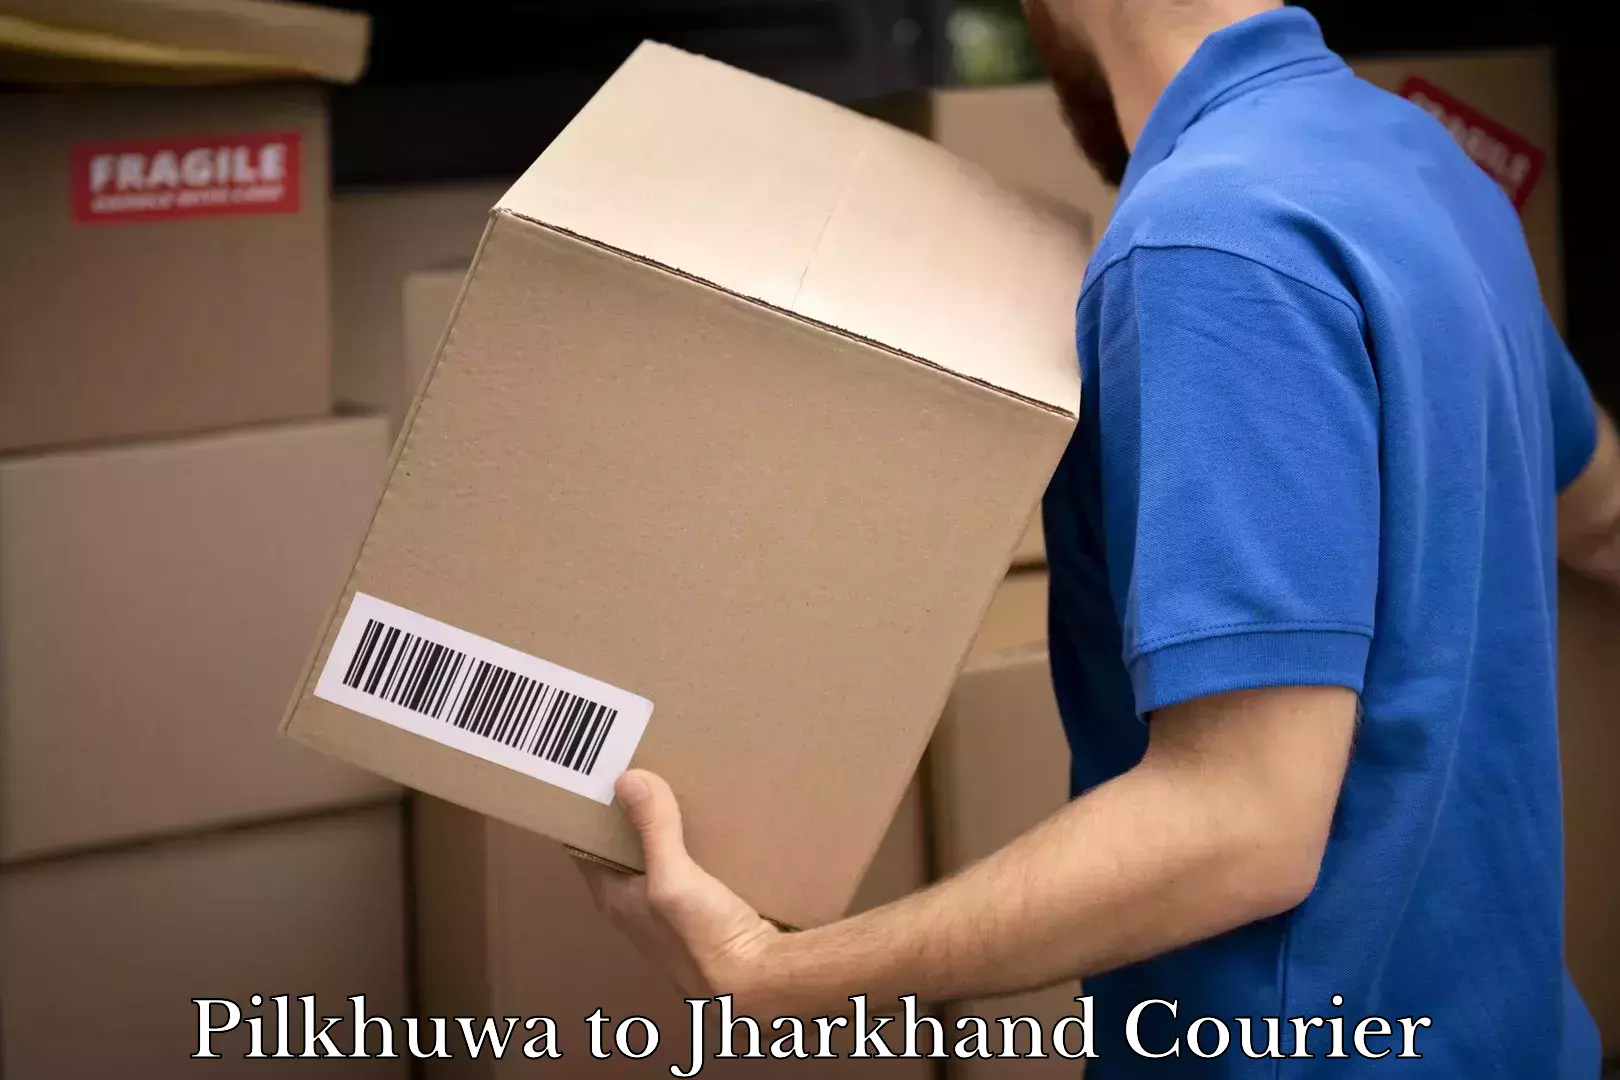 Multi-national courier services Pilkhuwa to Jharkhand